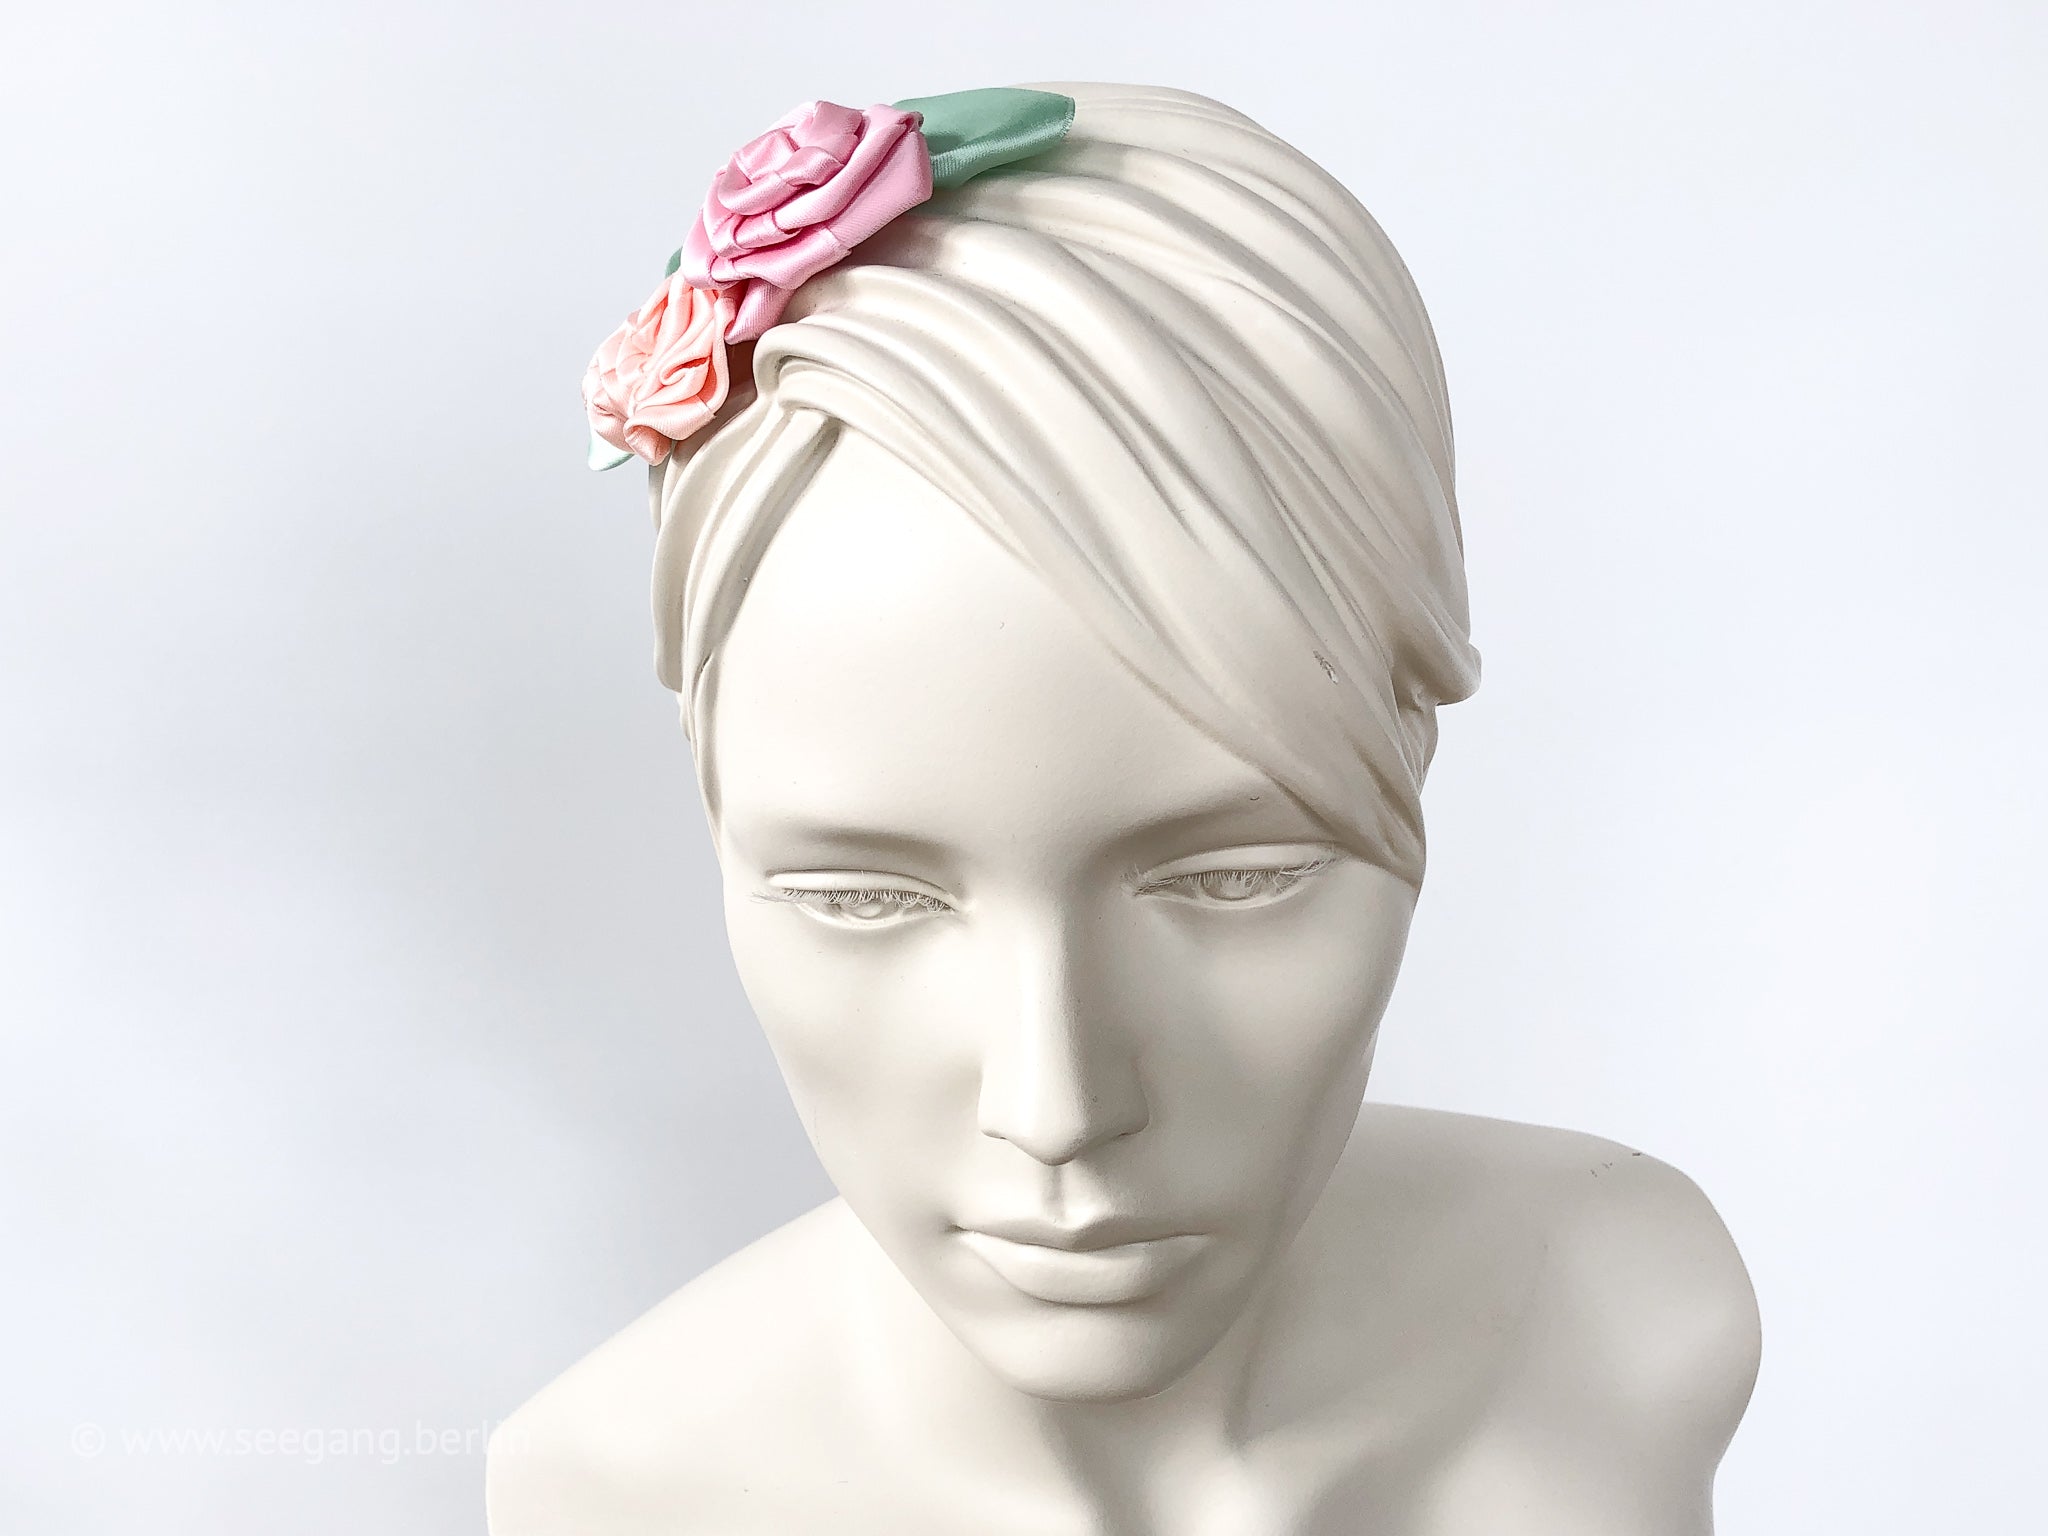 Fascinator, Hair flowers with roses in sorbet colors and mint colored leaves. Fresh!